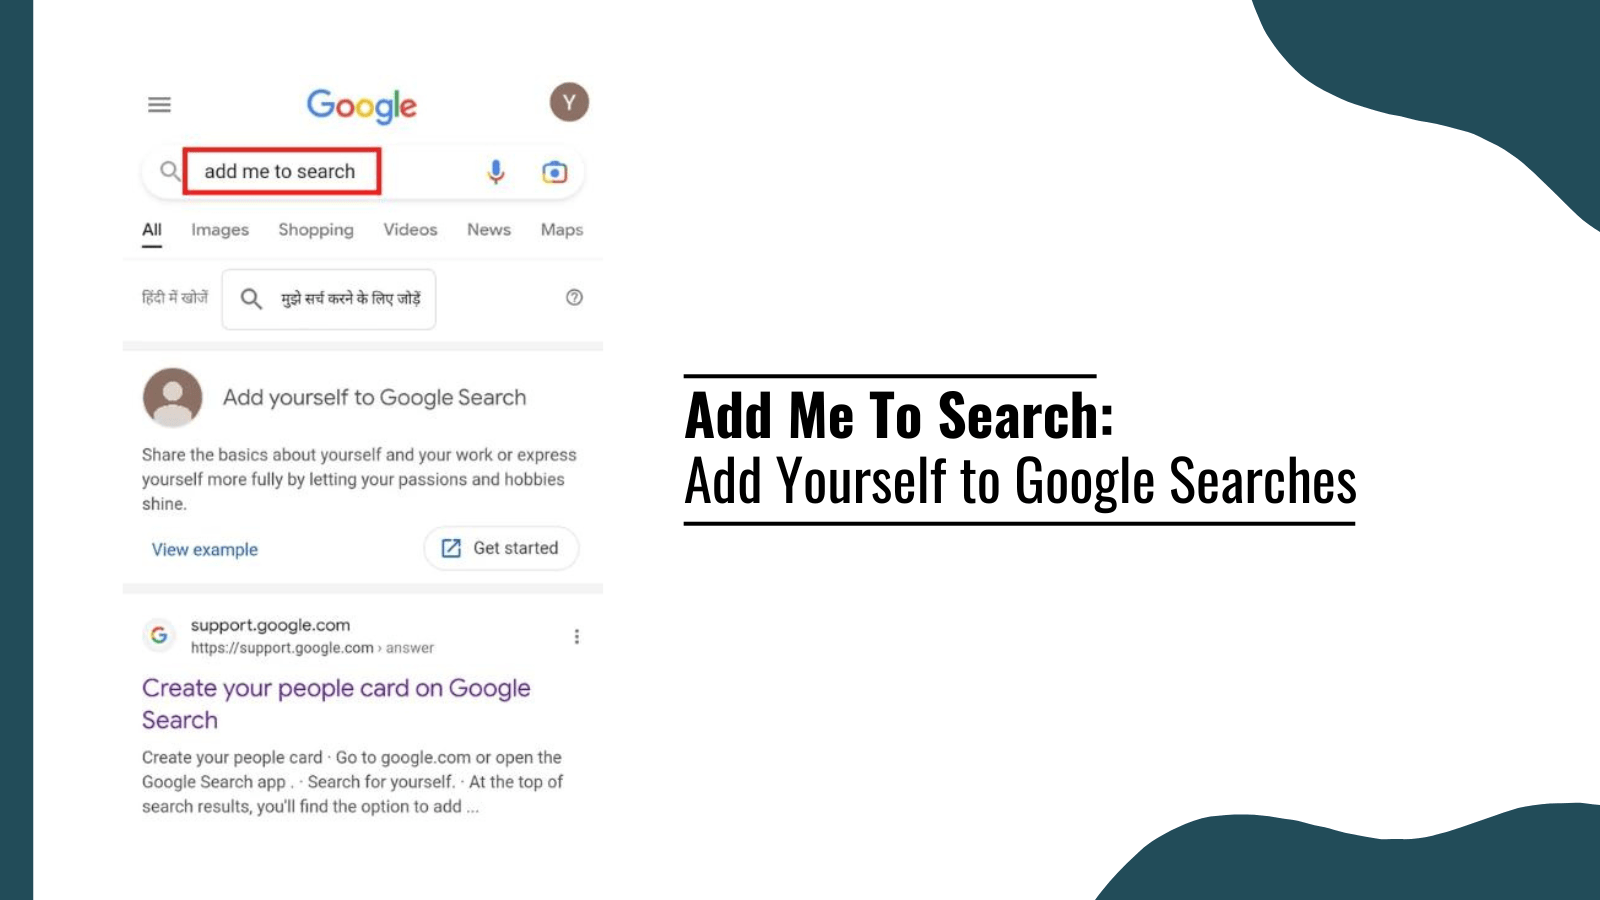 Add Me To Search: Add Yourself to Google Searches